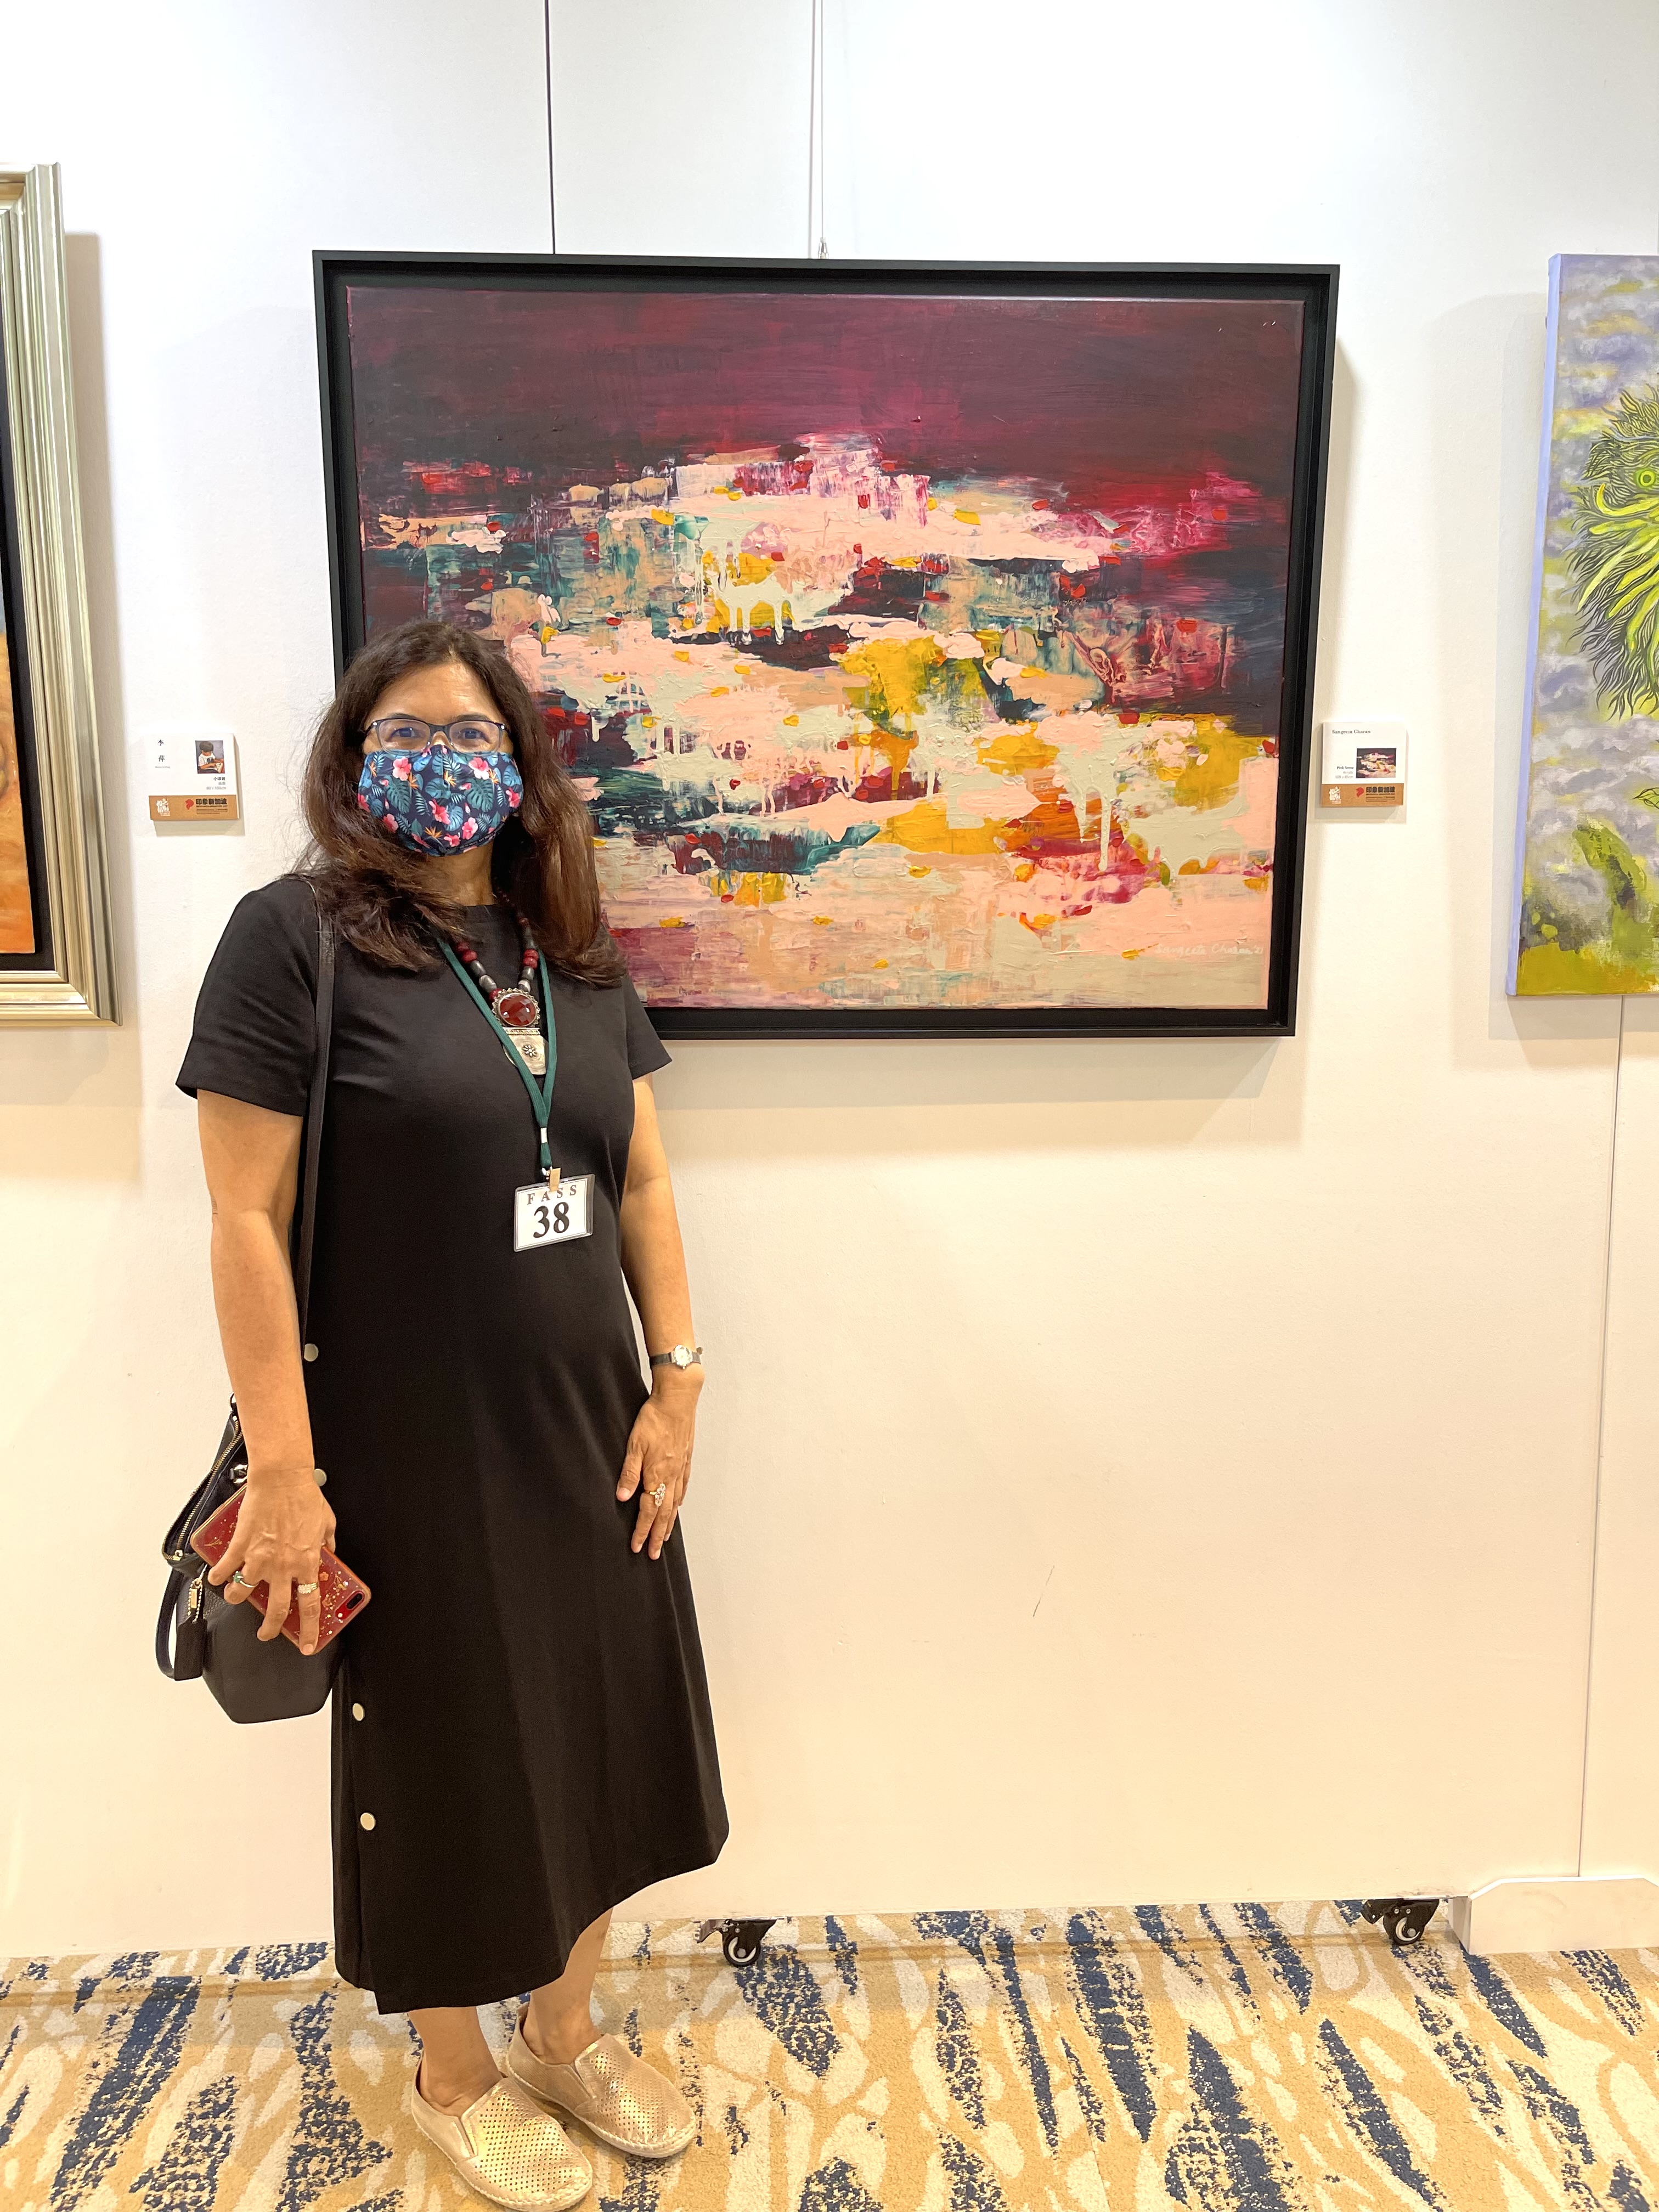 Exhibition by Federation of art Society Singapore, August, 2021. - Sangeeta Charan